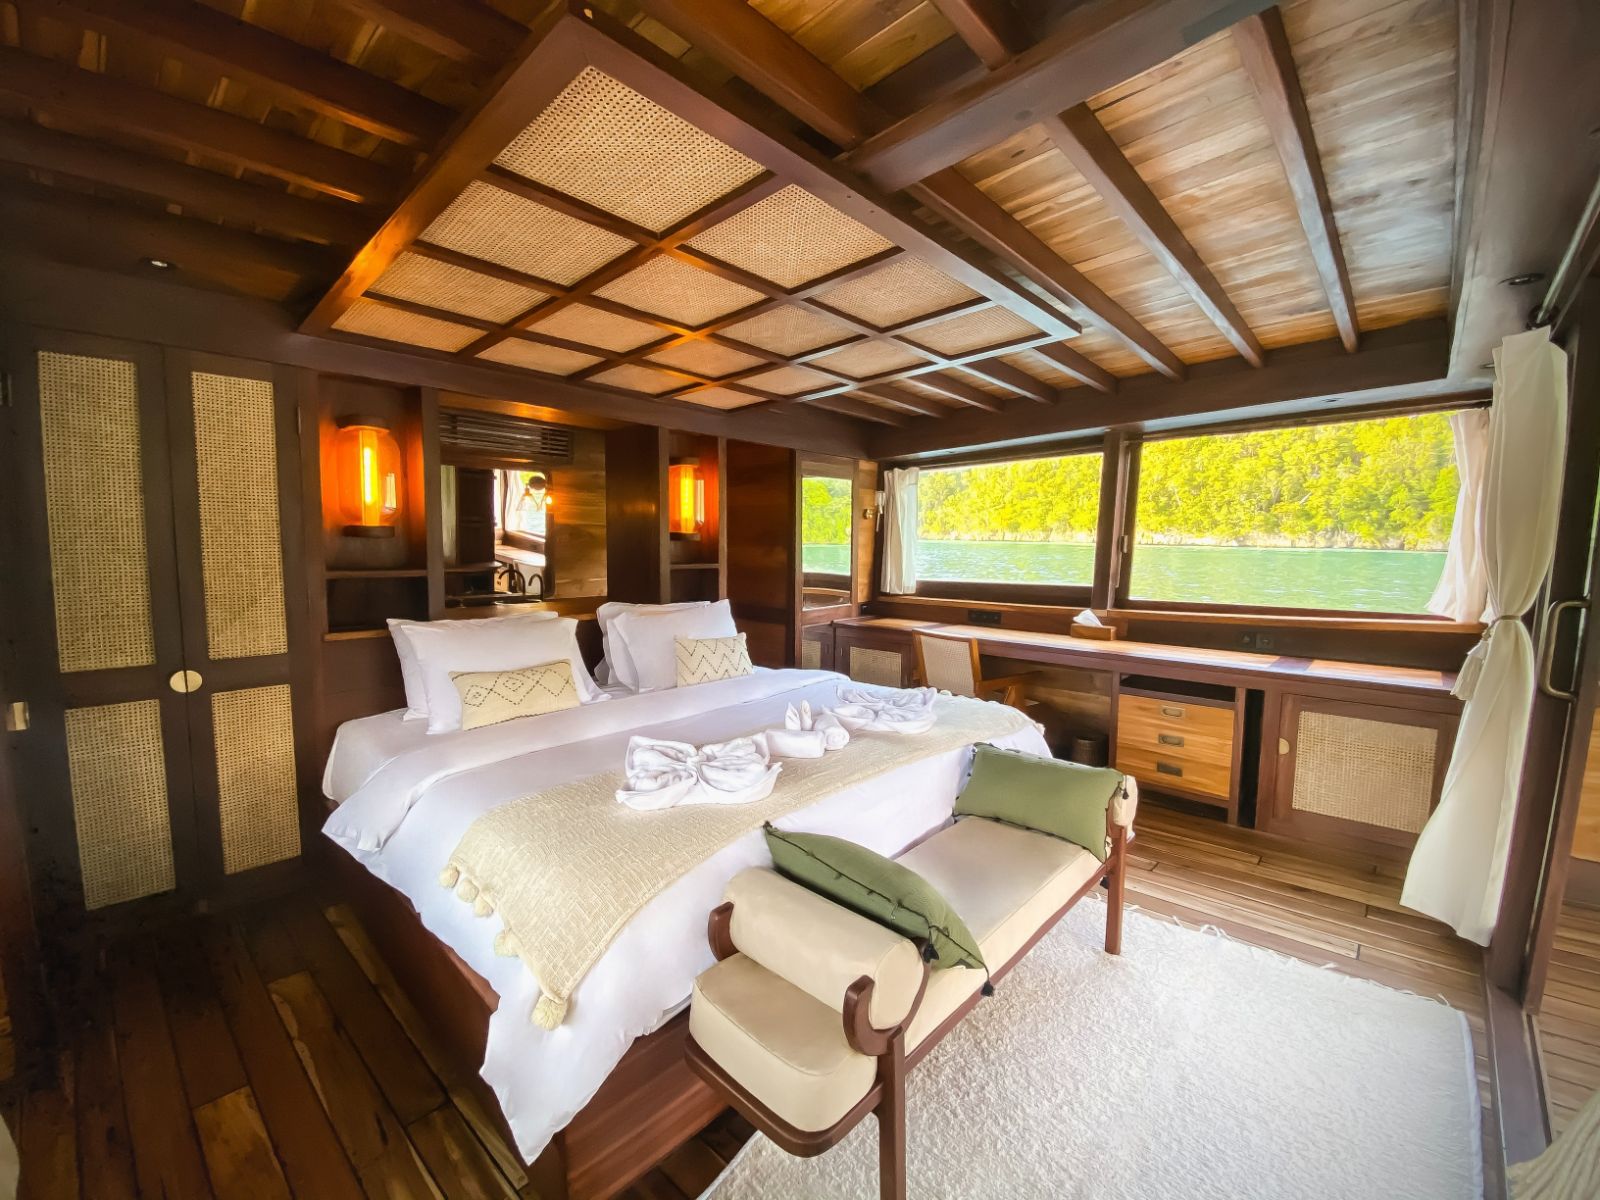 Guest bedroom onboard the Senja phinisi in Indonesia